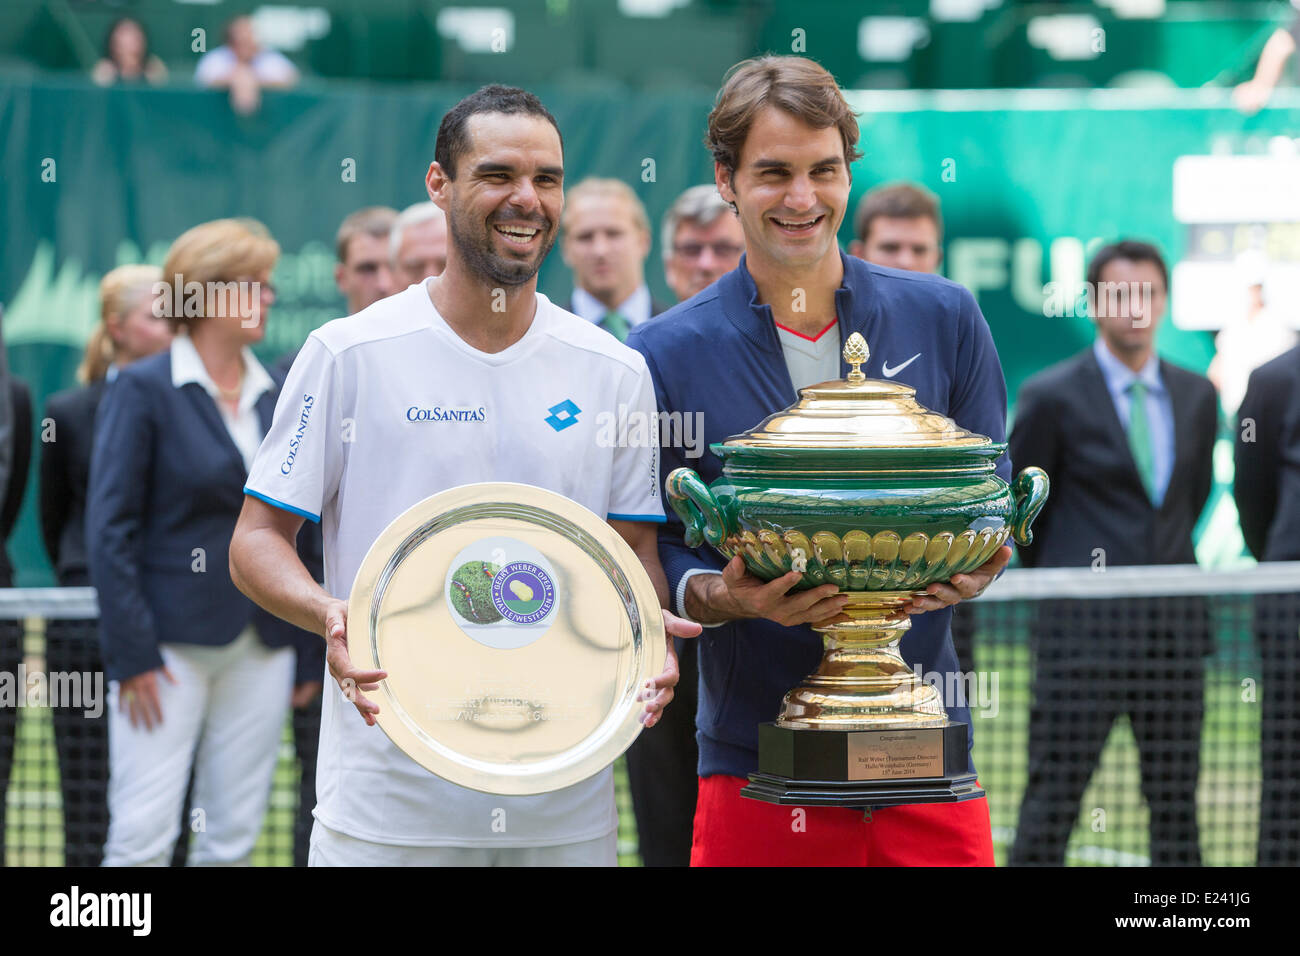 Halle, Germany. 15th June, 2014. Tennis players Roger Federer (SUI) and  Alejandro Falla (COL) show their trophies during the trophy ceremony after  the singles final of the Gerry-Weber-Open 2014 at the Gerry-Weber-Stadion,